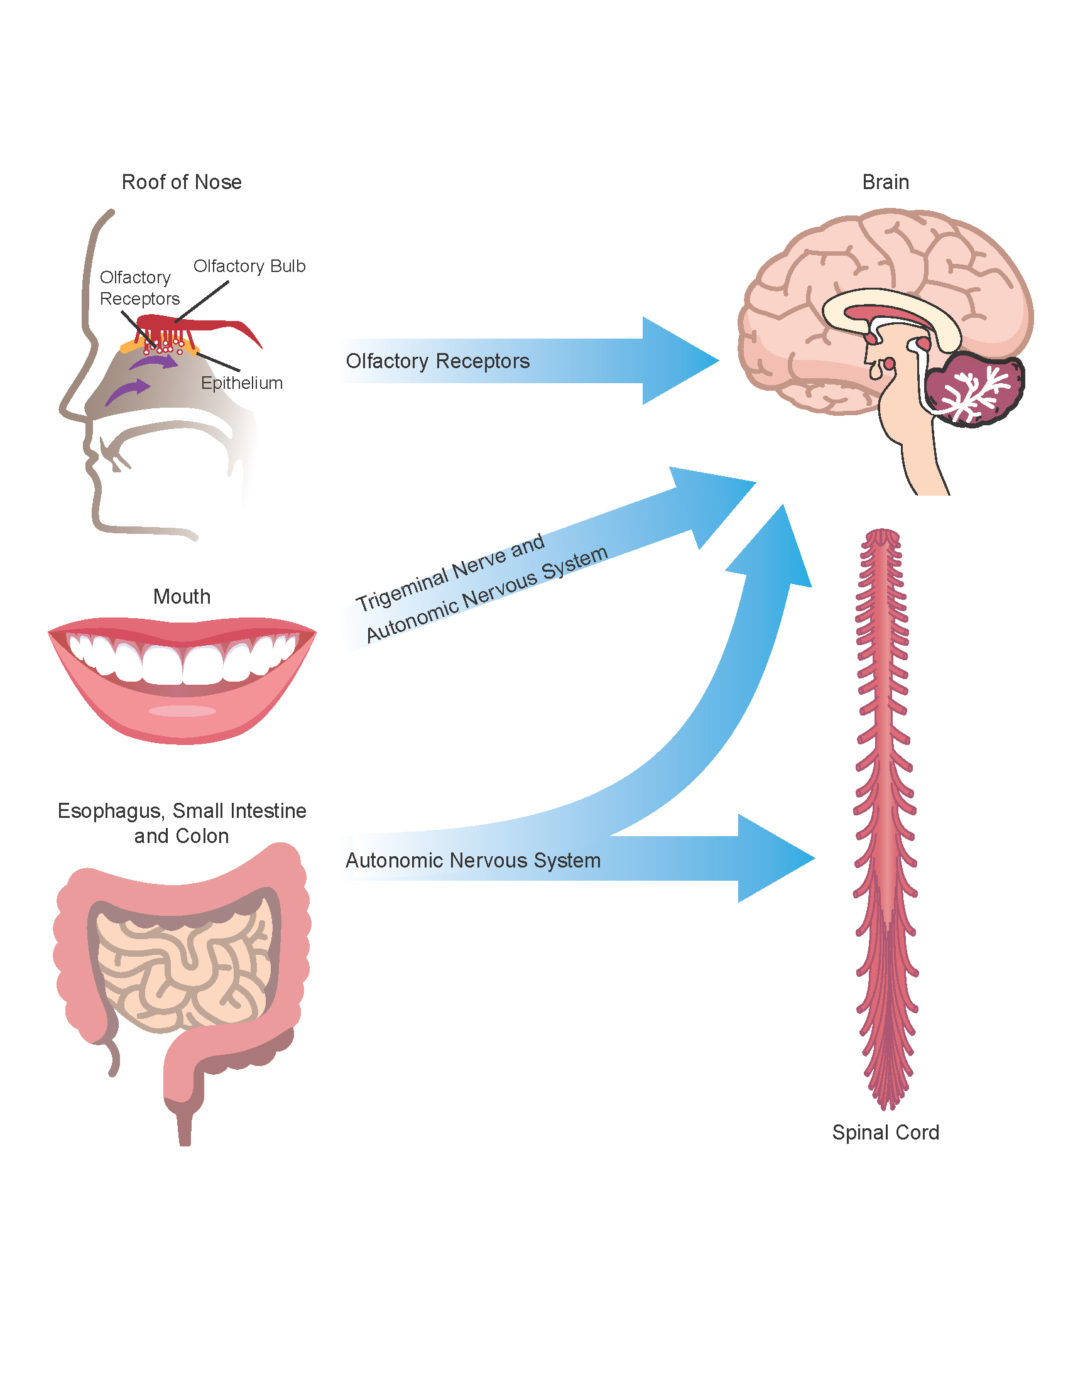 Amyloid produced by commensal bacteria may cause changes in protein folding and neuroinflammation in the central nervous system through the autonomic nervous system (particularly the vagus nerve), the trigeminal nerve in the mouth and nasopharynx, and the gut (including mouth, esophagus, stomach and intestines), as well as via the olfactory receptors in the roof of the nose.